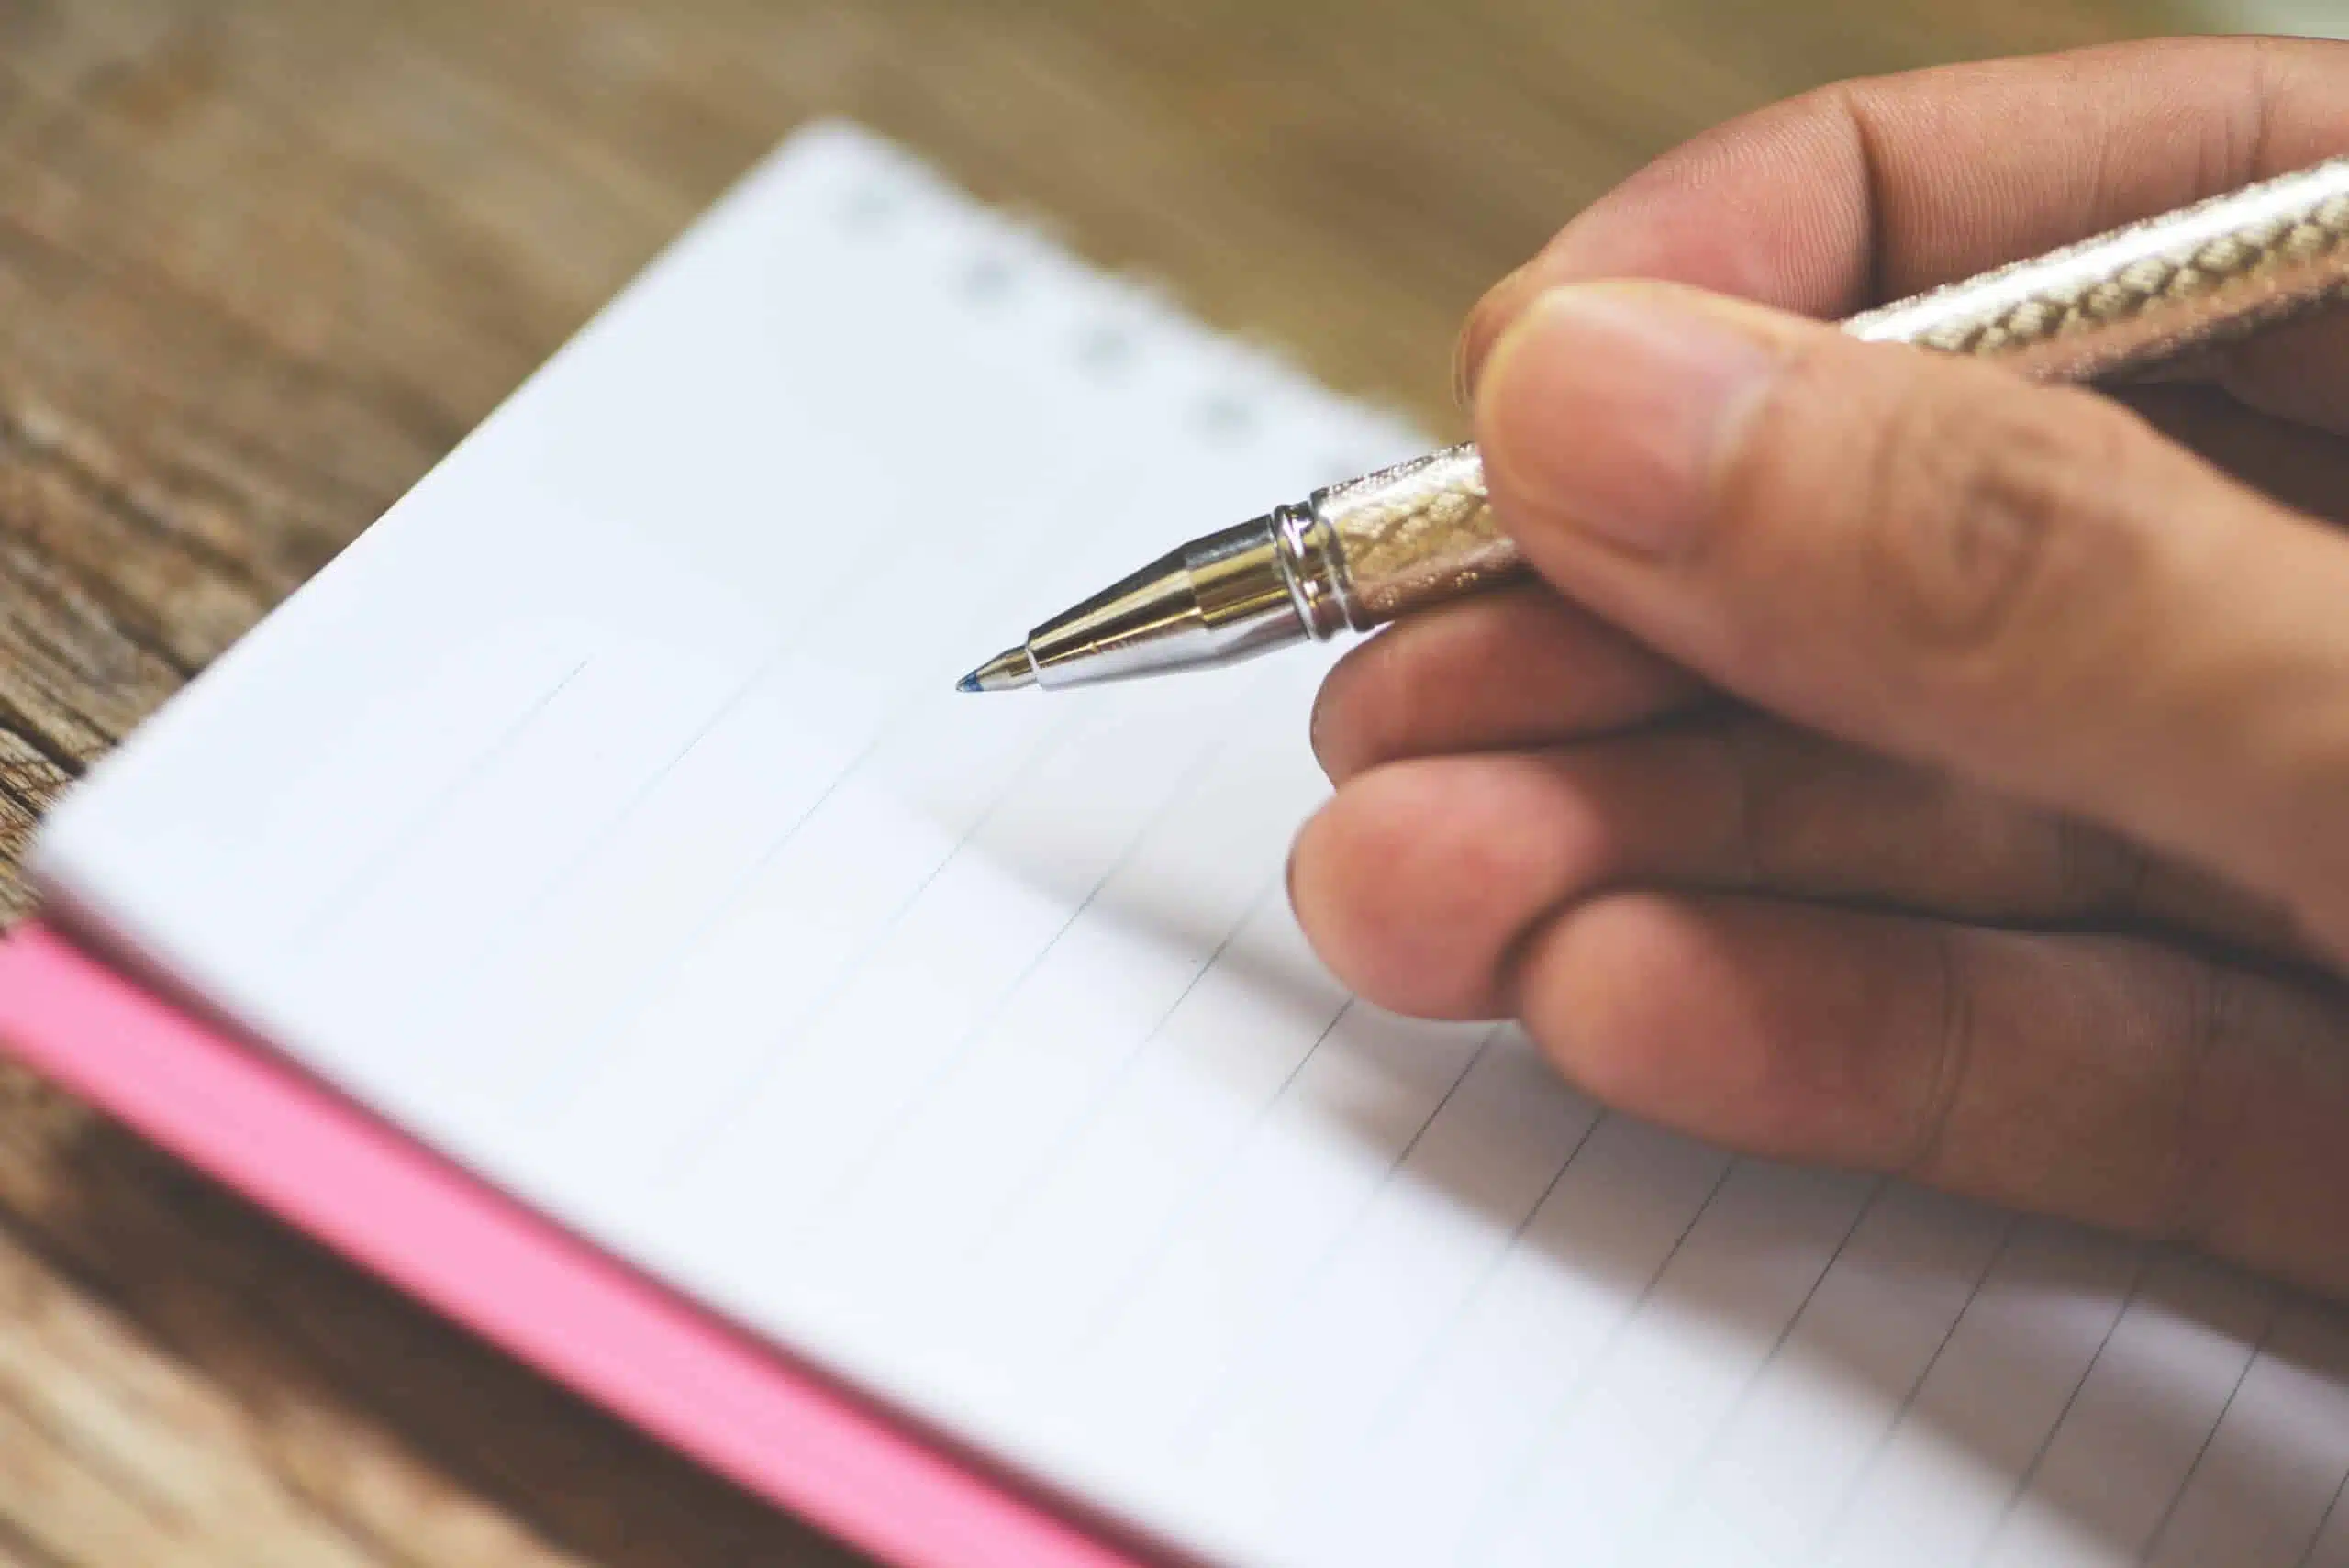 Male hand holding a pen about to write in an empty notebook.